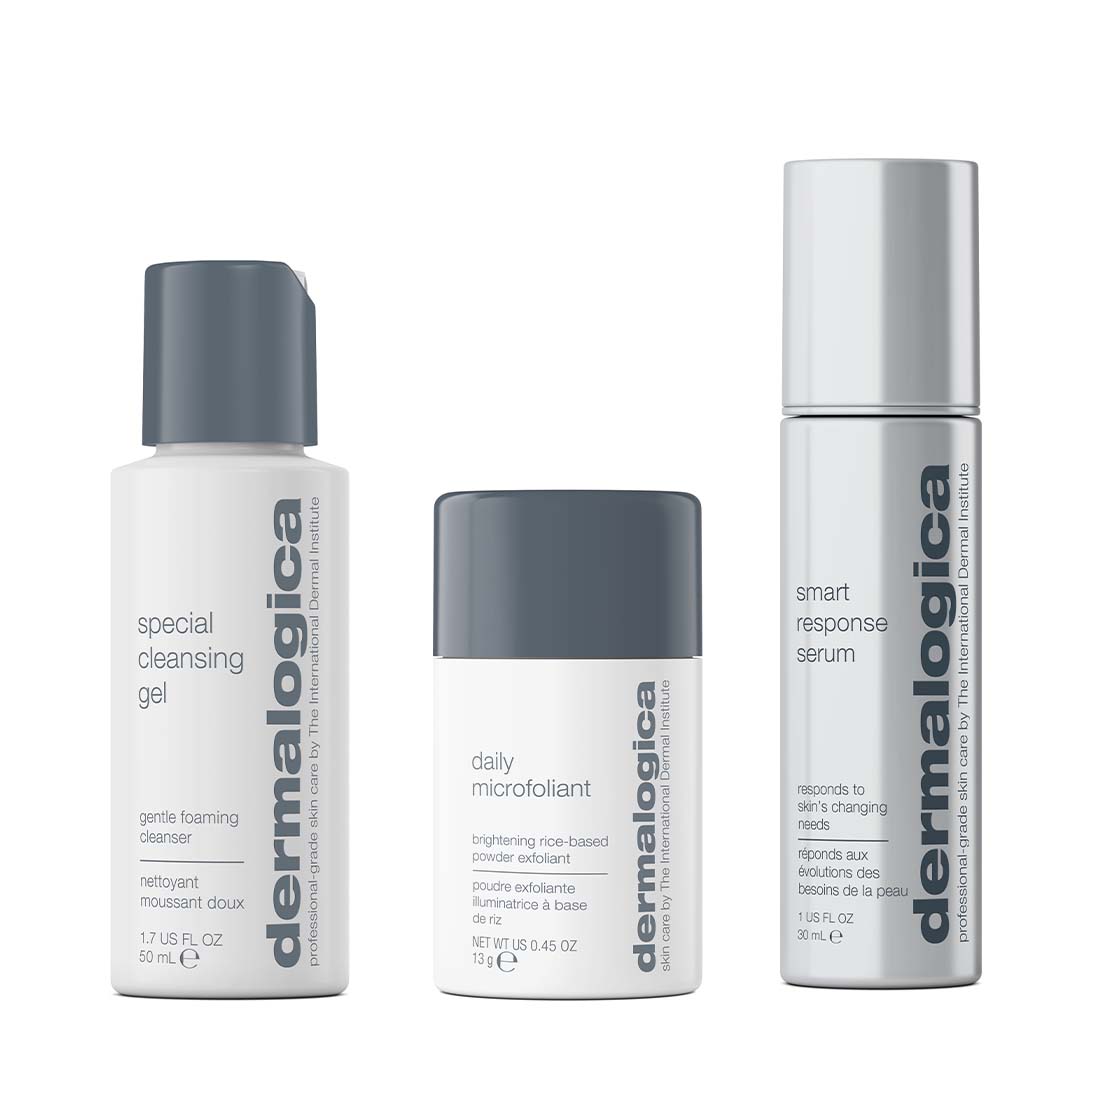 the personalised skin care set